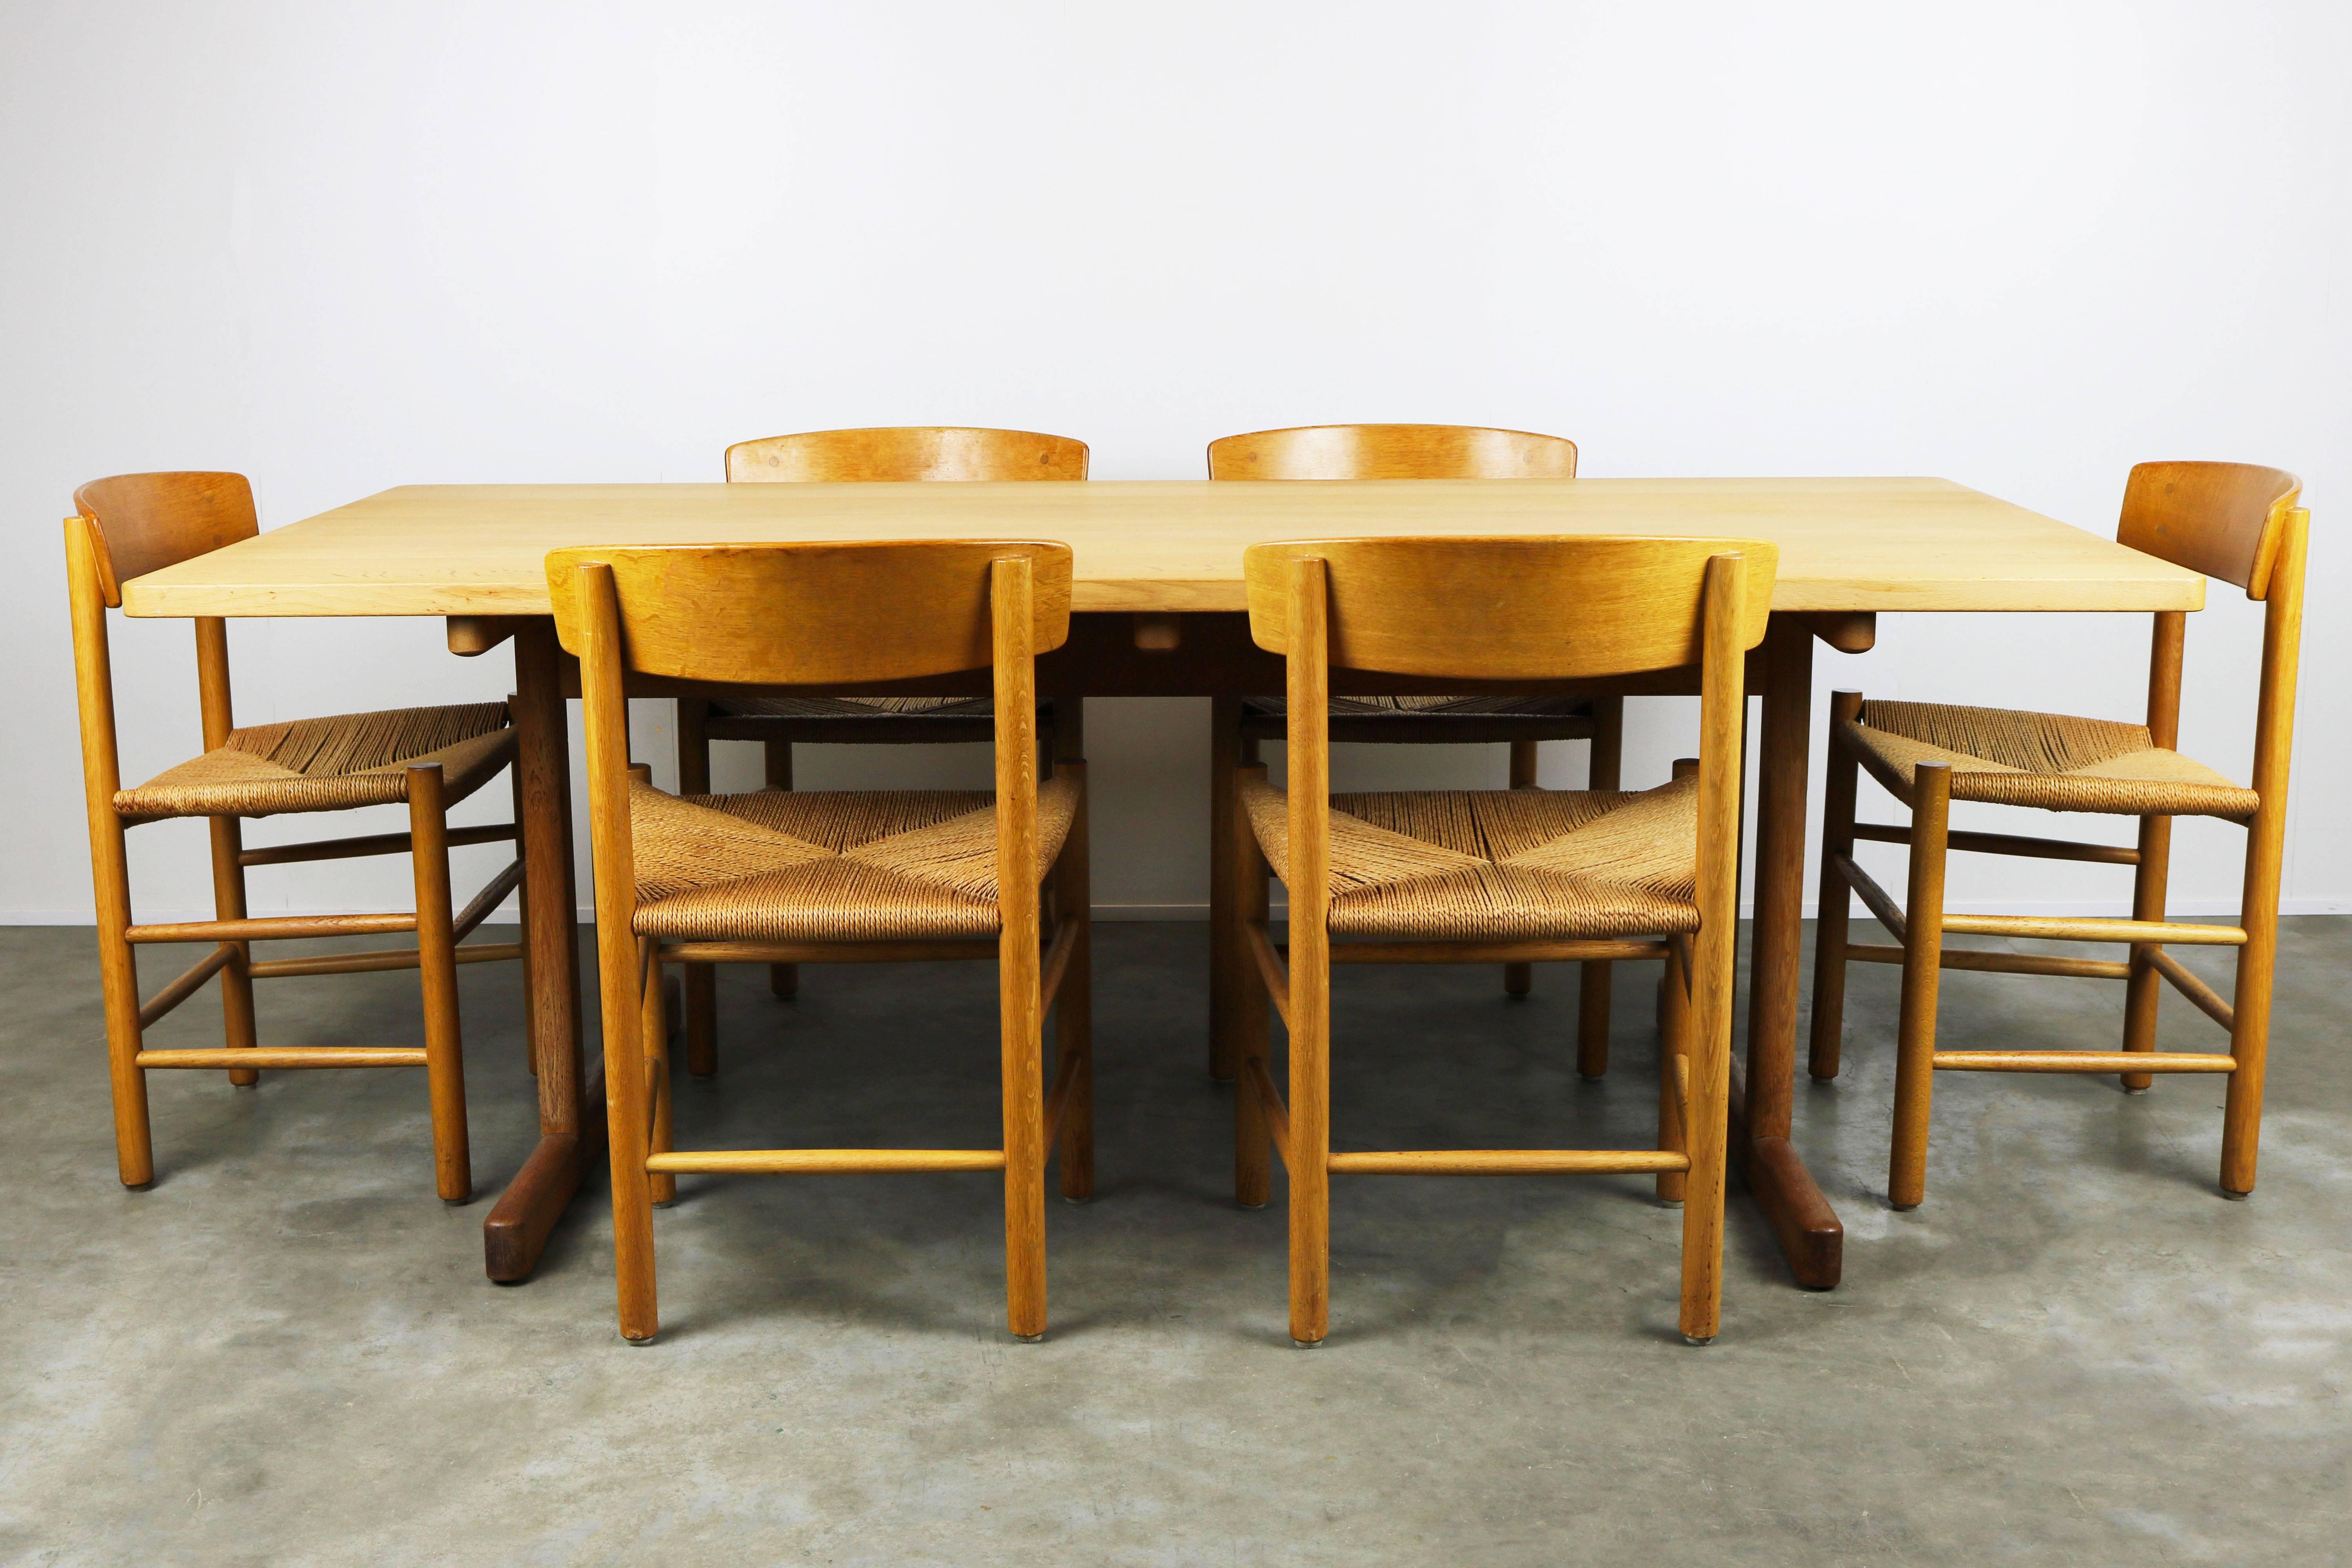 Magnificent Danish dining room set by Borge Mogensen for Fredericia Stolefabric 1950. Wonderful solid oak 6286 table and six matching J39 (The People's chair) chairs with papercord seat. To find a complete set like this is very rare. De set comes